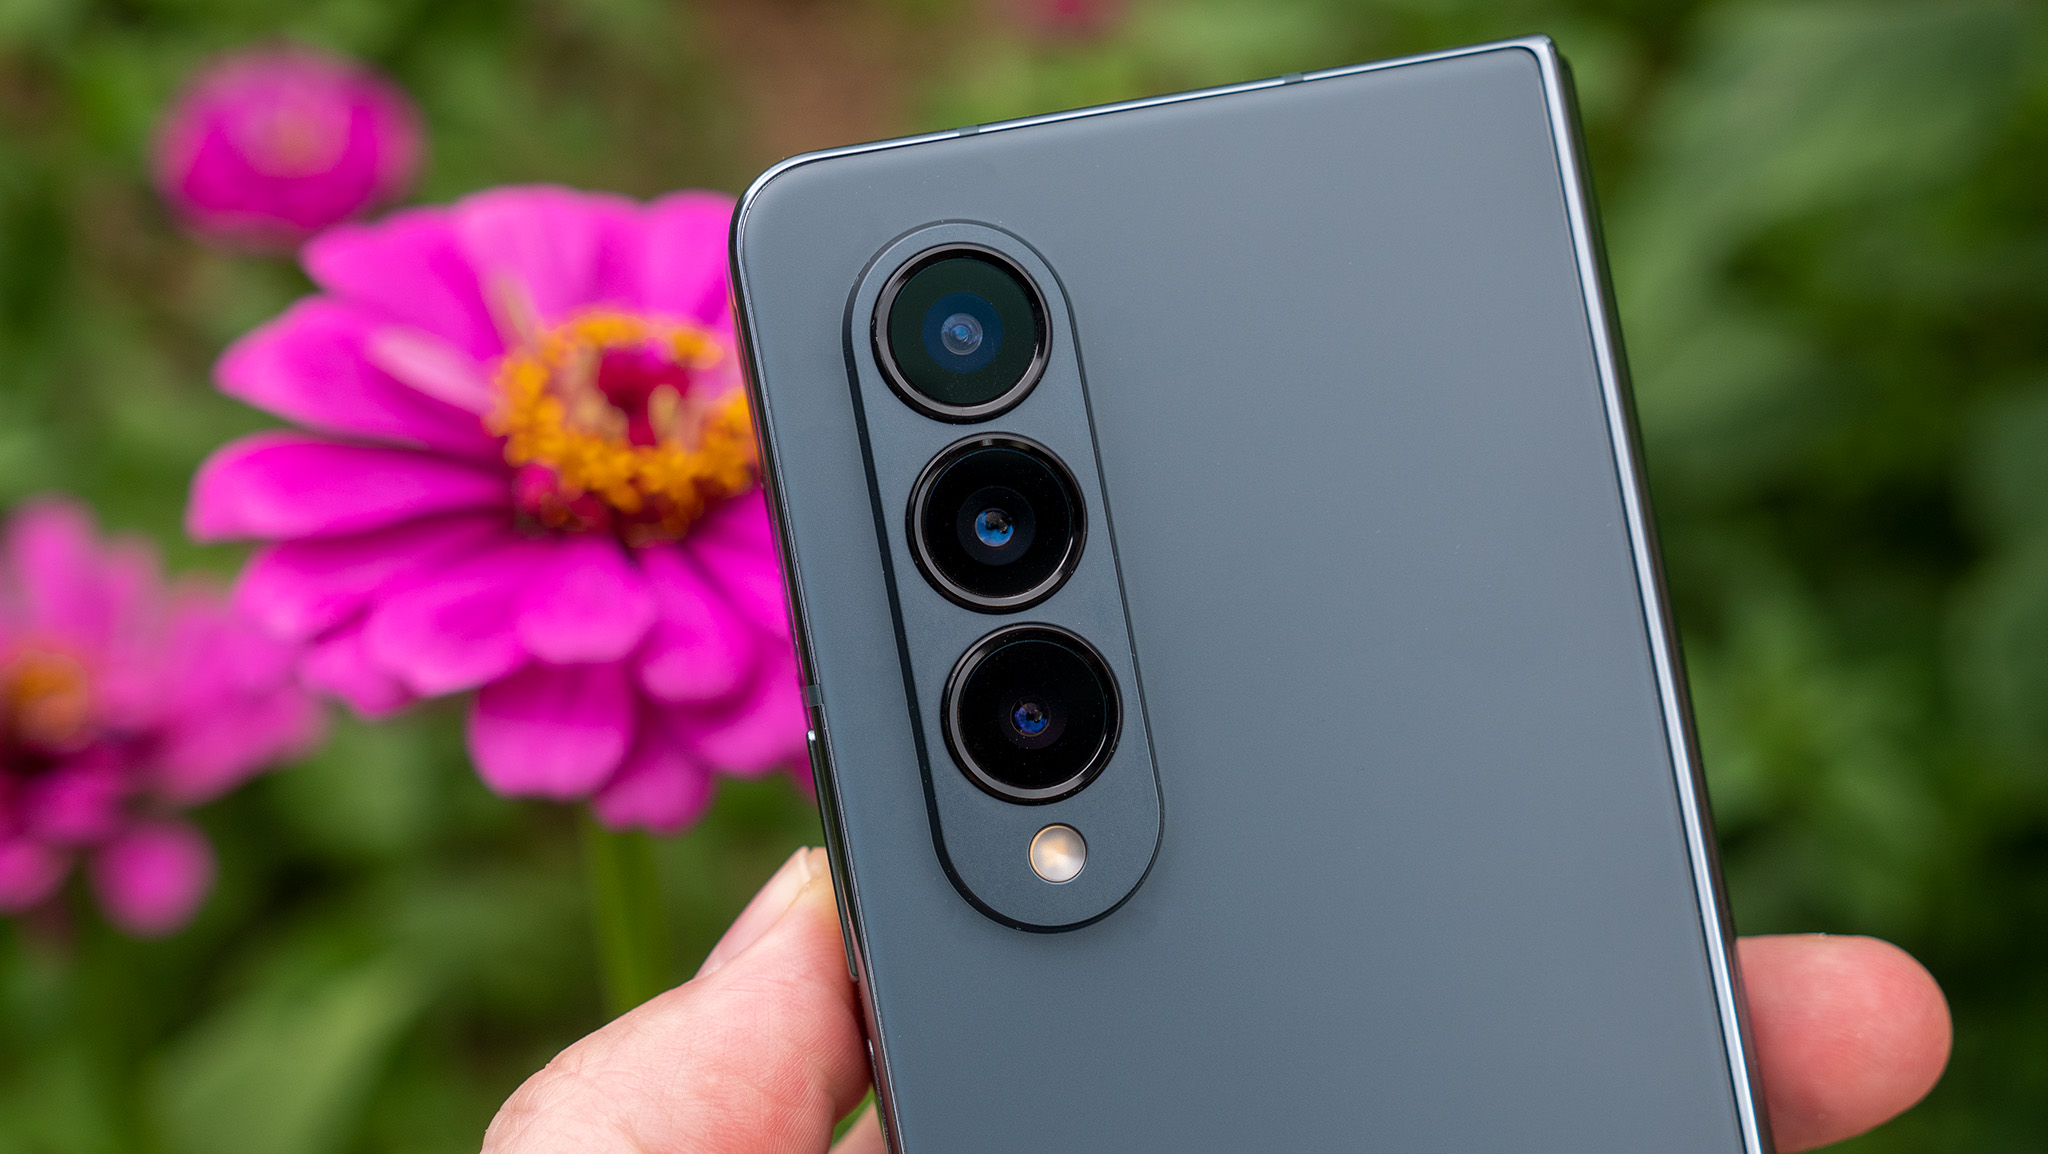 Samsung Galaxy Z Fold 4 camera module with flowers in the background